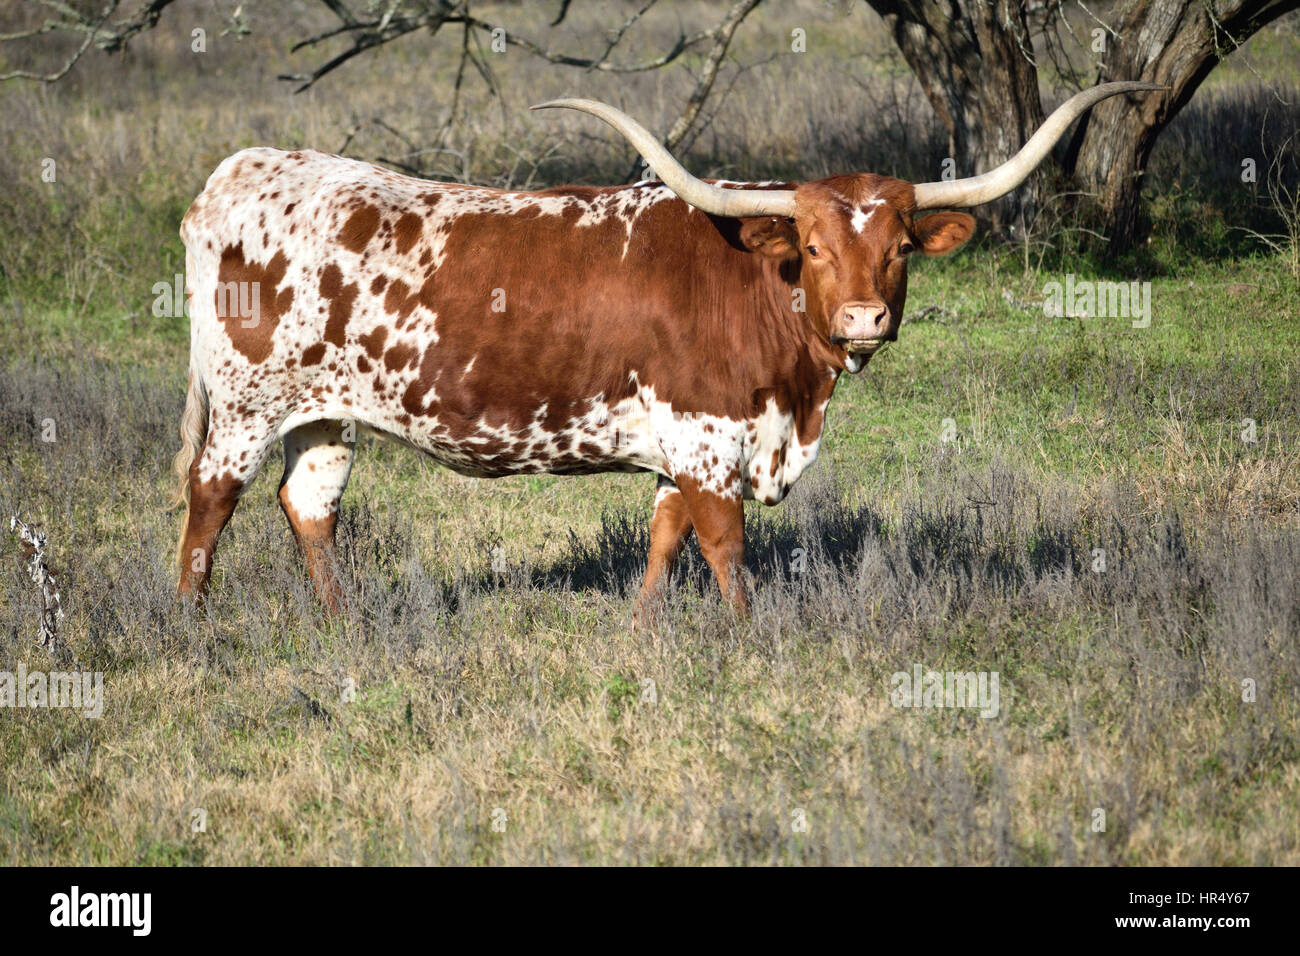 A brown and white Texas Longhorn looks directly at the camera while grazing in a field. Stock Photo